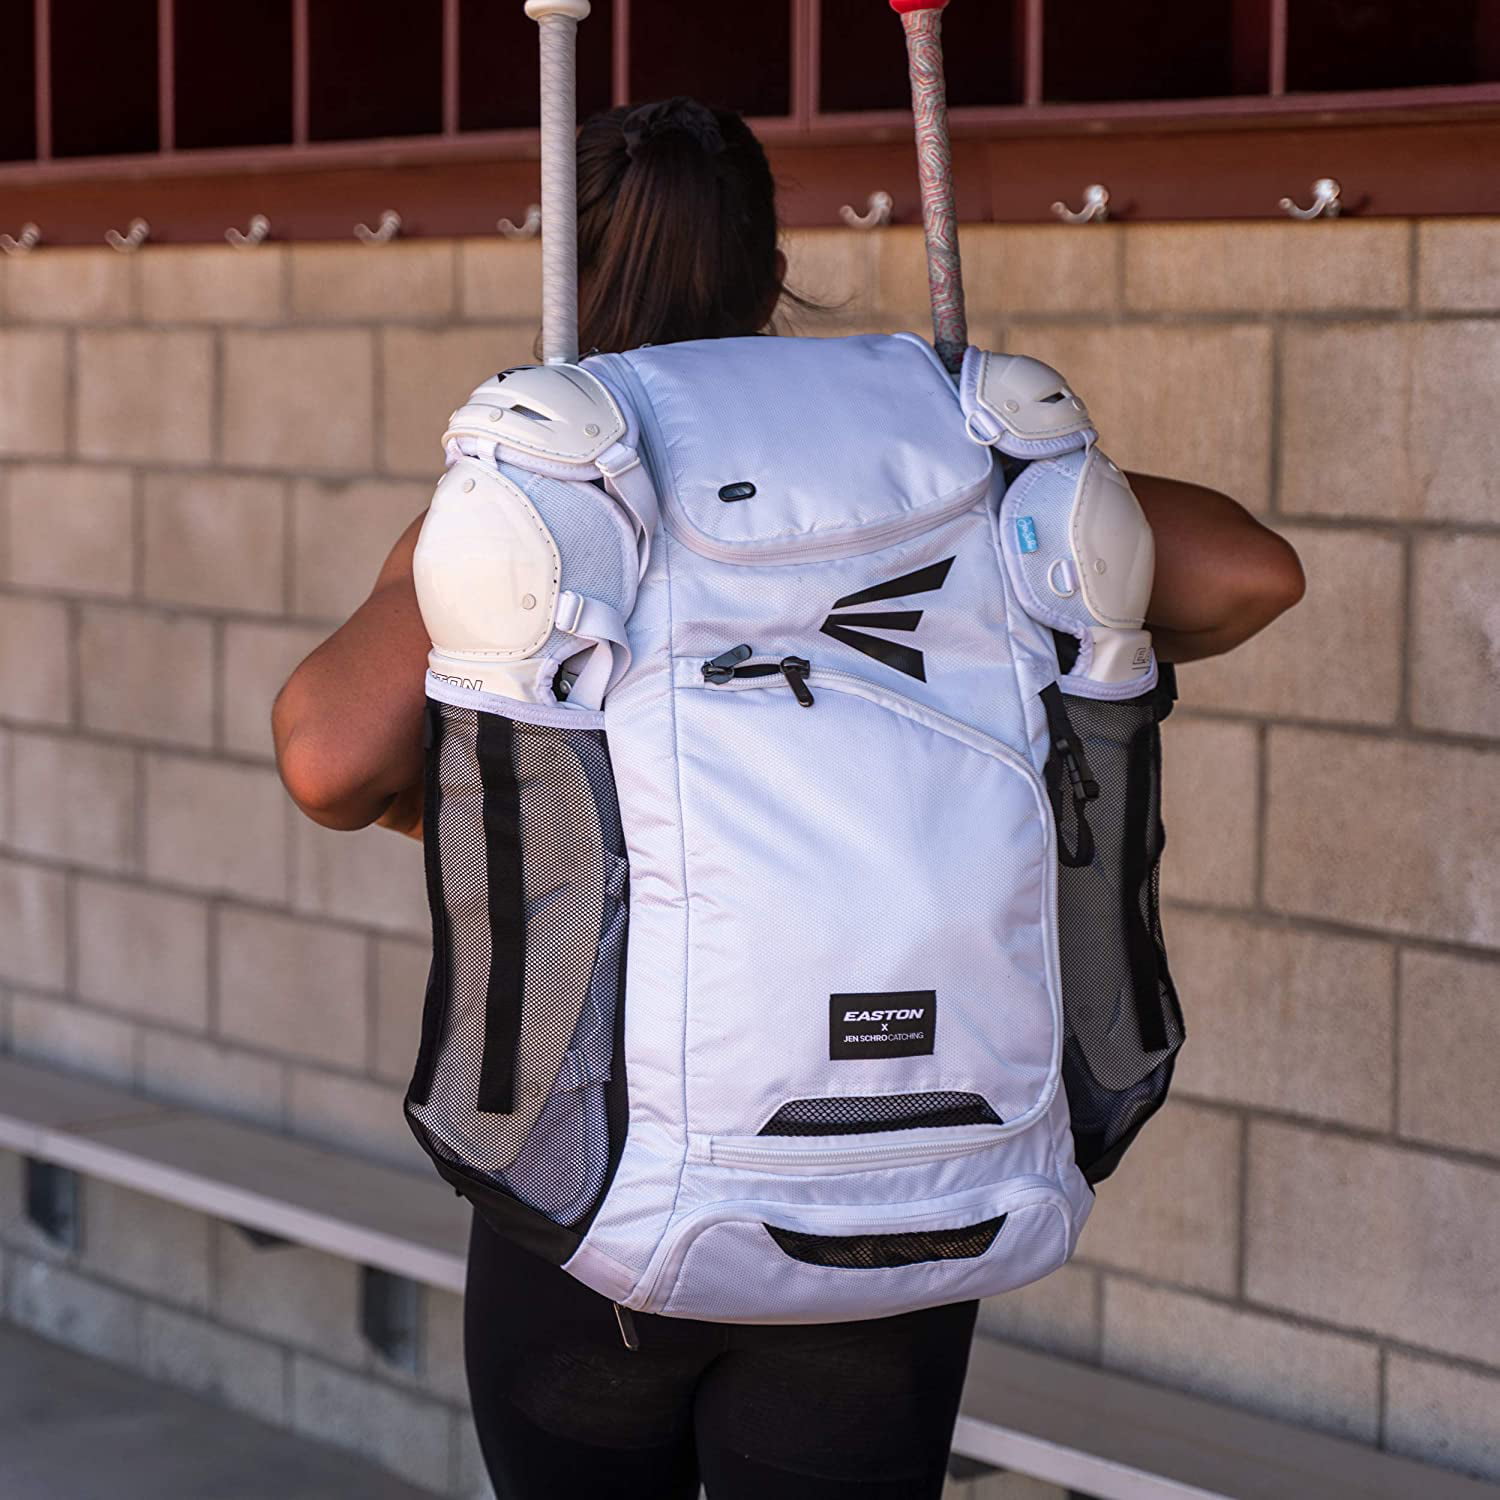 EASTON JEN SCHRO Edition Softball Catchers Bat and Equipment Backpack | |  White | Female Inspiration Lining | Vented Main Gear Compartment | Bats 